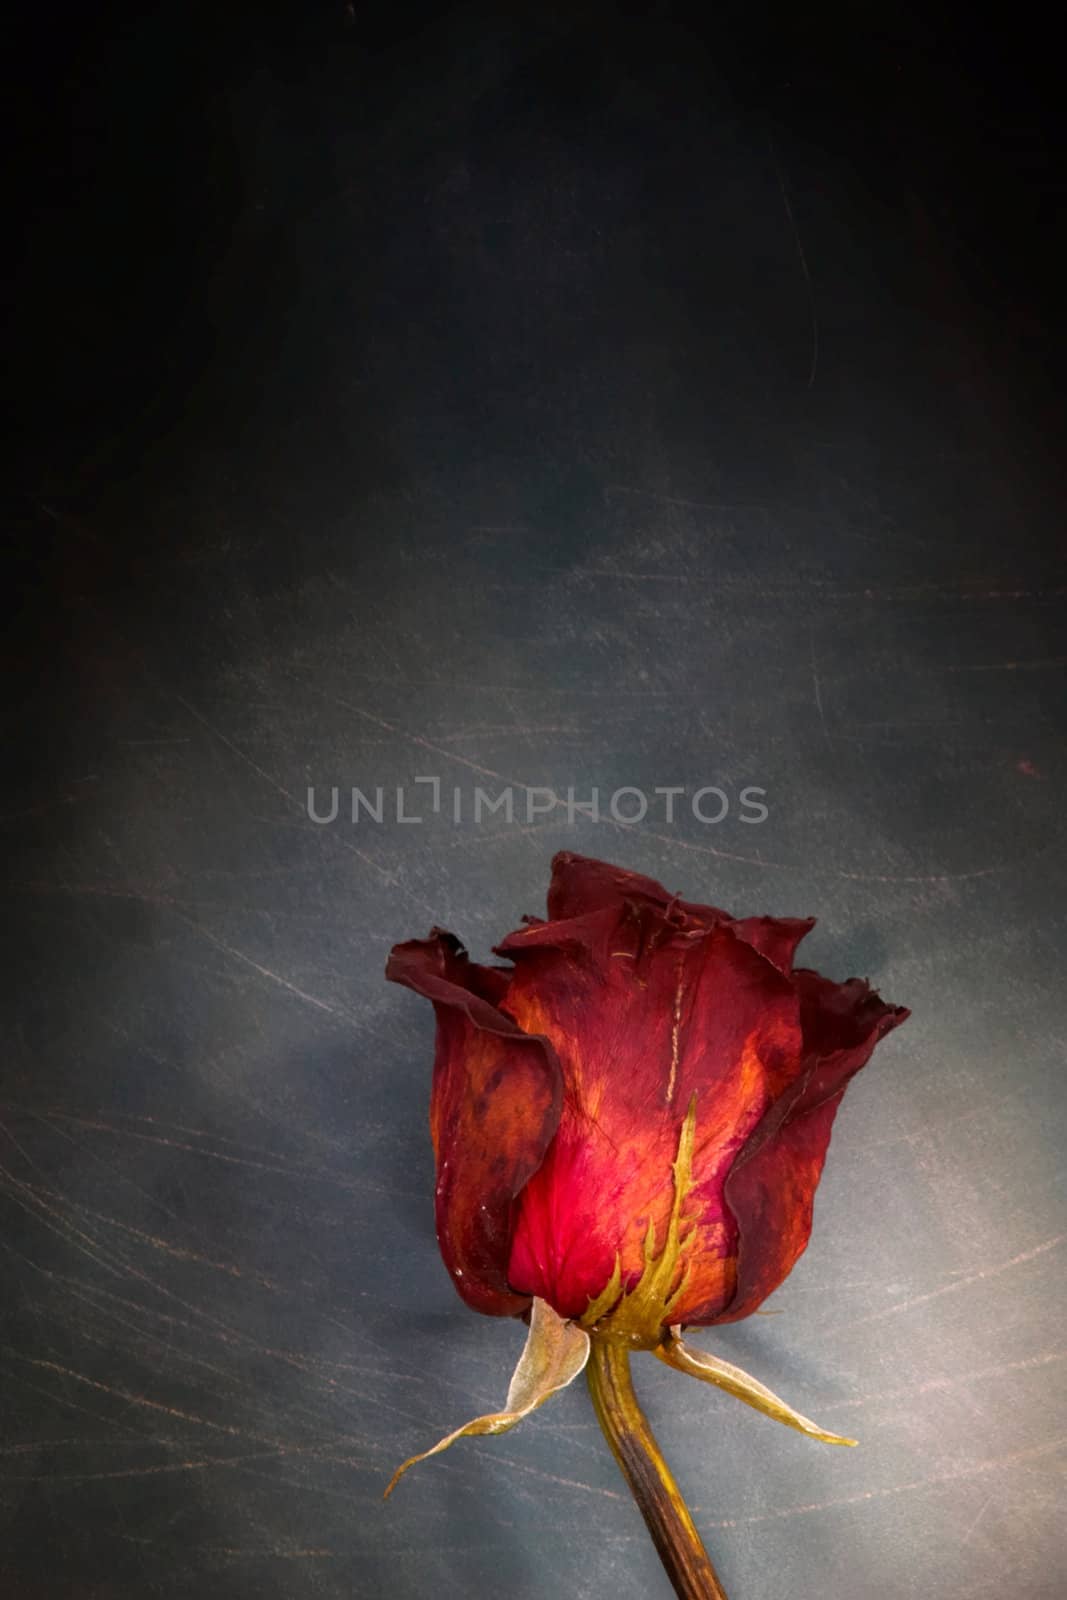 An image of red rose on background